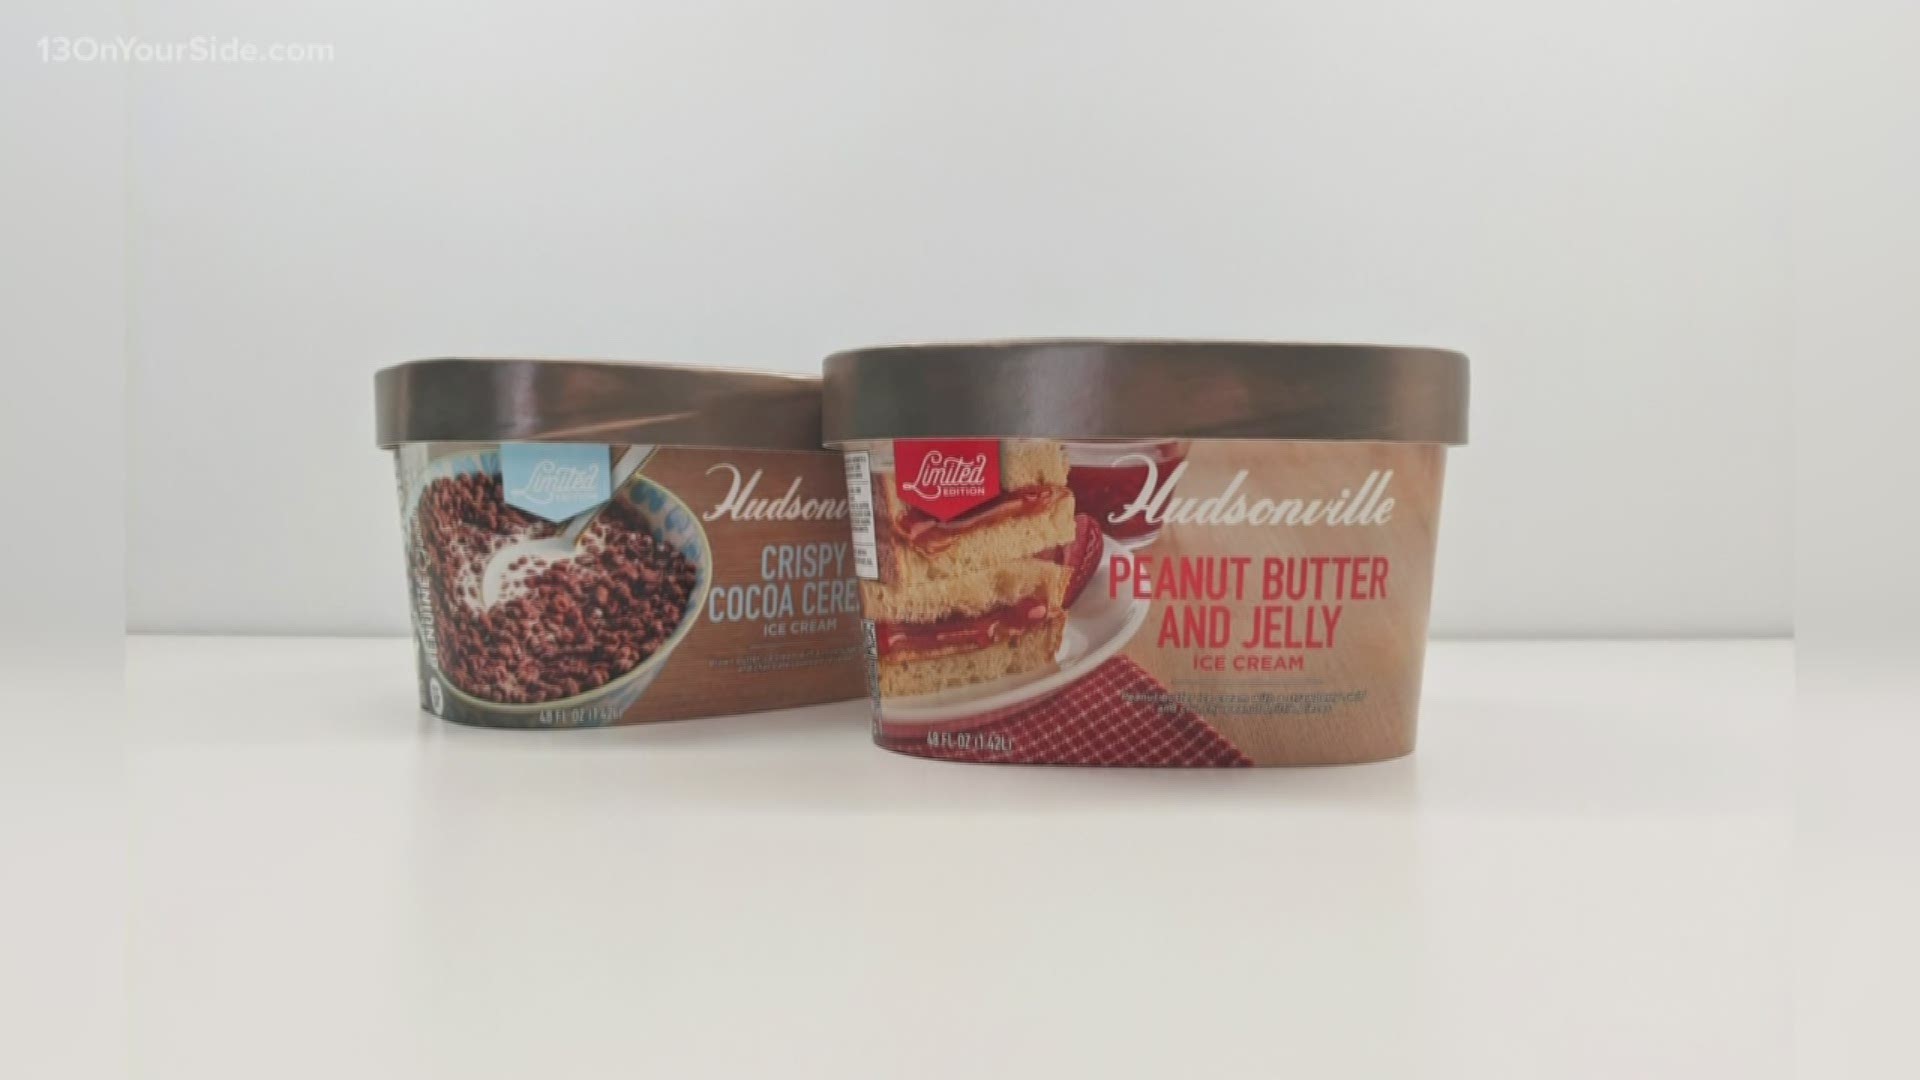 It's never too cold for ice cream. Hudsonville has released some new limited edition flavors: Crispy Cocoa Cereal and Peanut Butter and Jelly.